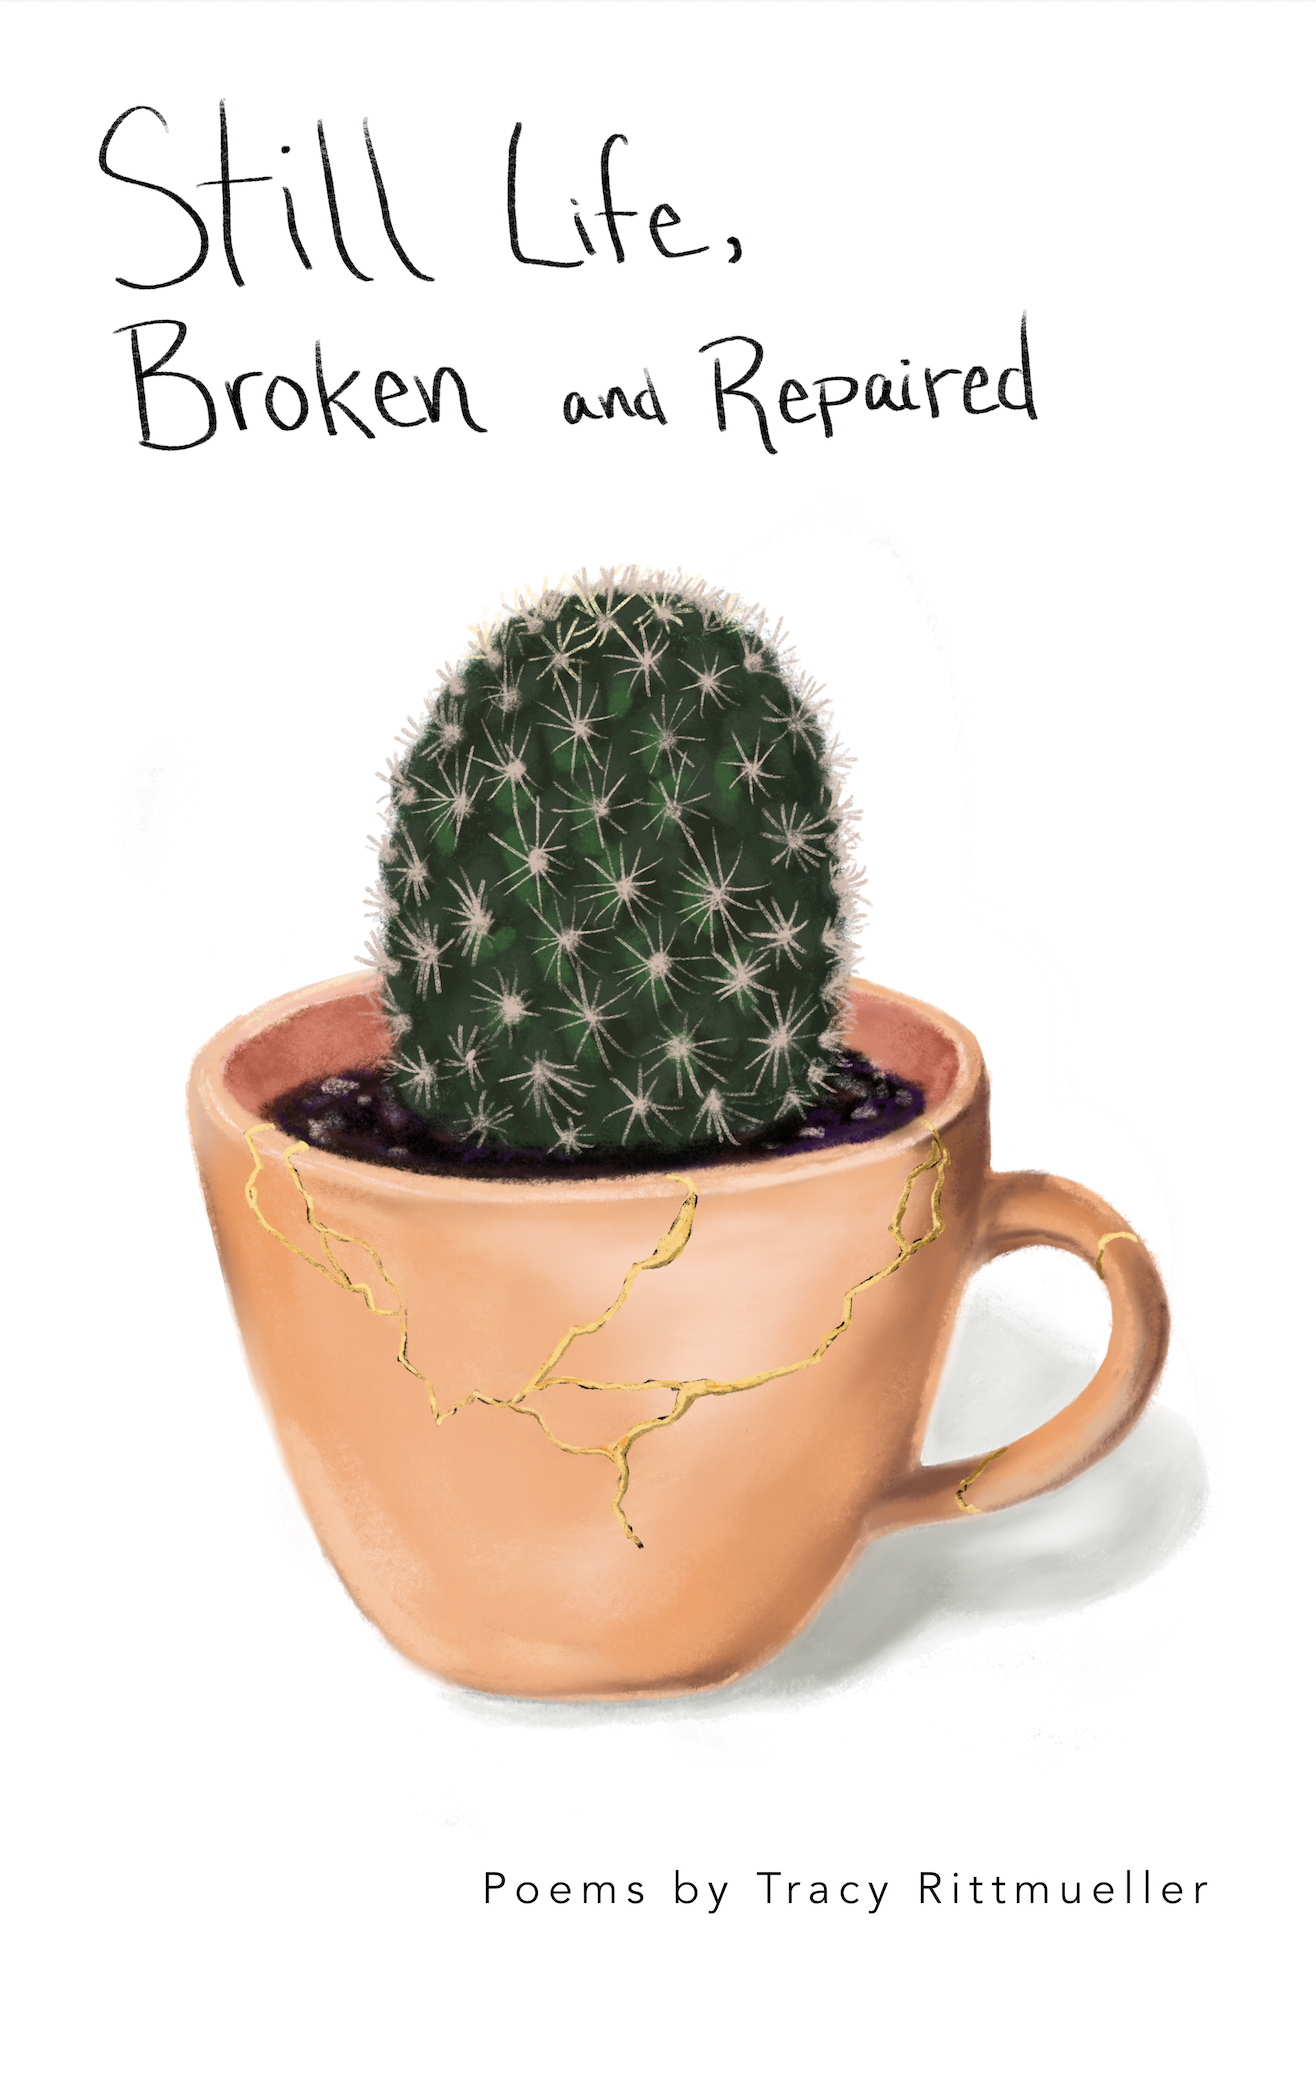 Book cover of Still Life, Broken and Repaired by Tracy Rittmueller shows a ocre tea cup repaired with golden mortor in which a miniature pincusion cactus is planted